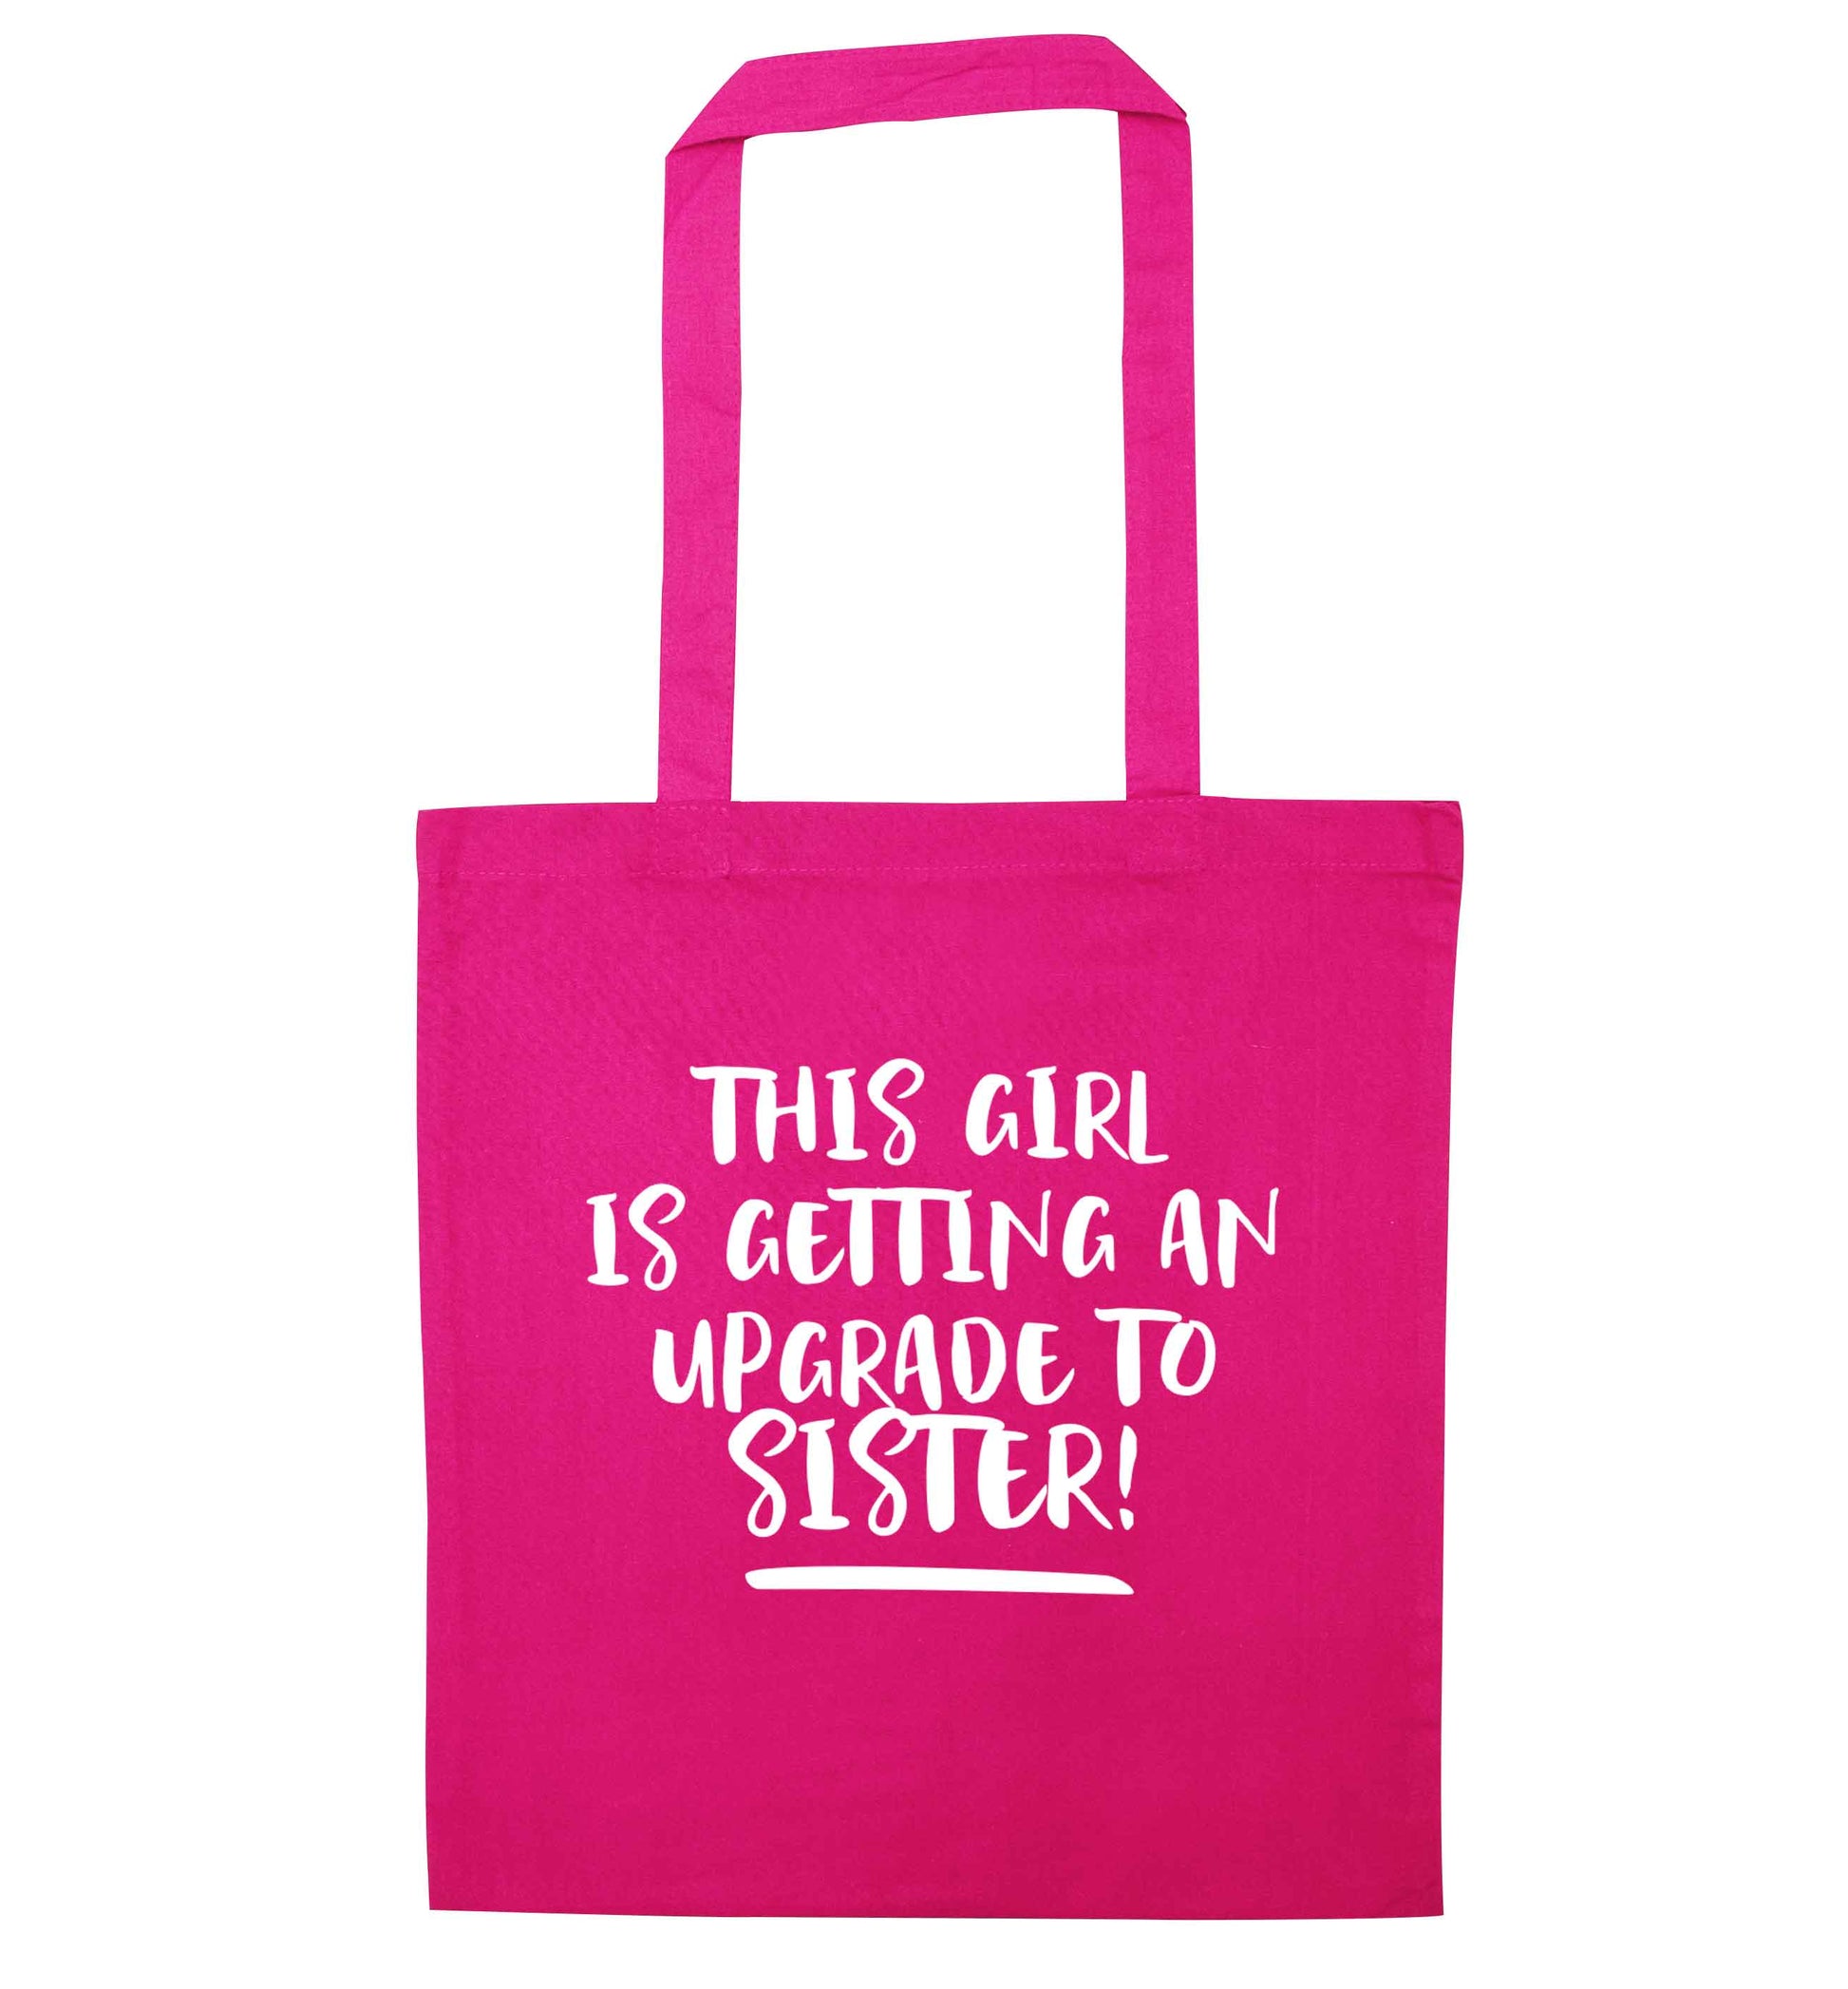 This girl is getting an upgrade to sister! pink tote bag